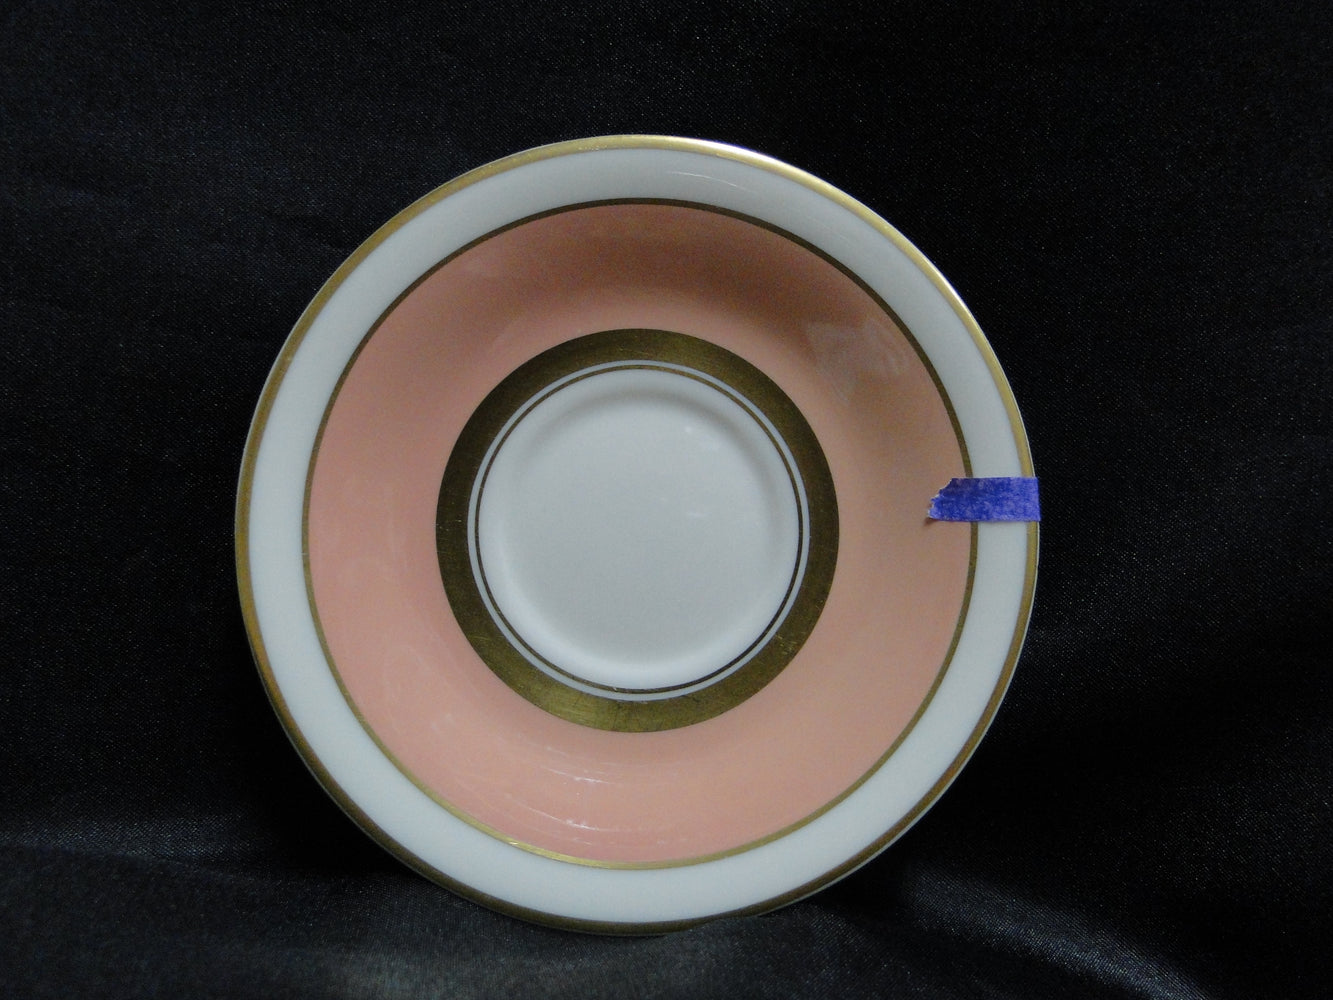 Syracuse Salisbury, Coral Rim: 4 3/8" Demitasse Saucer Only, No Cup, As Is